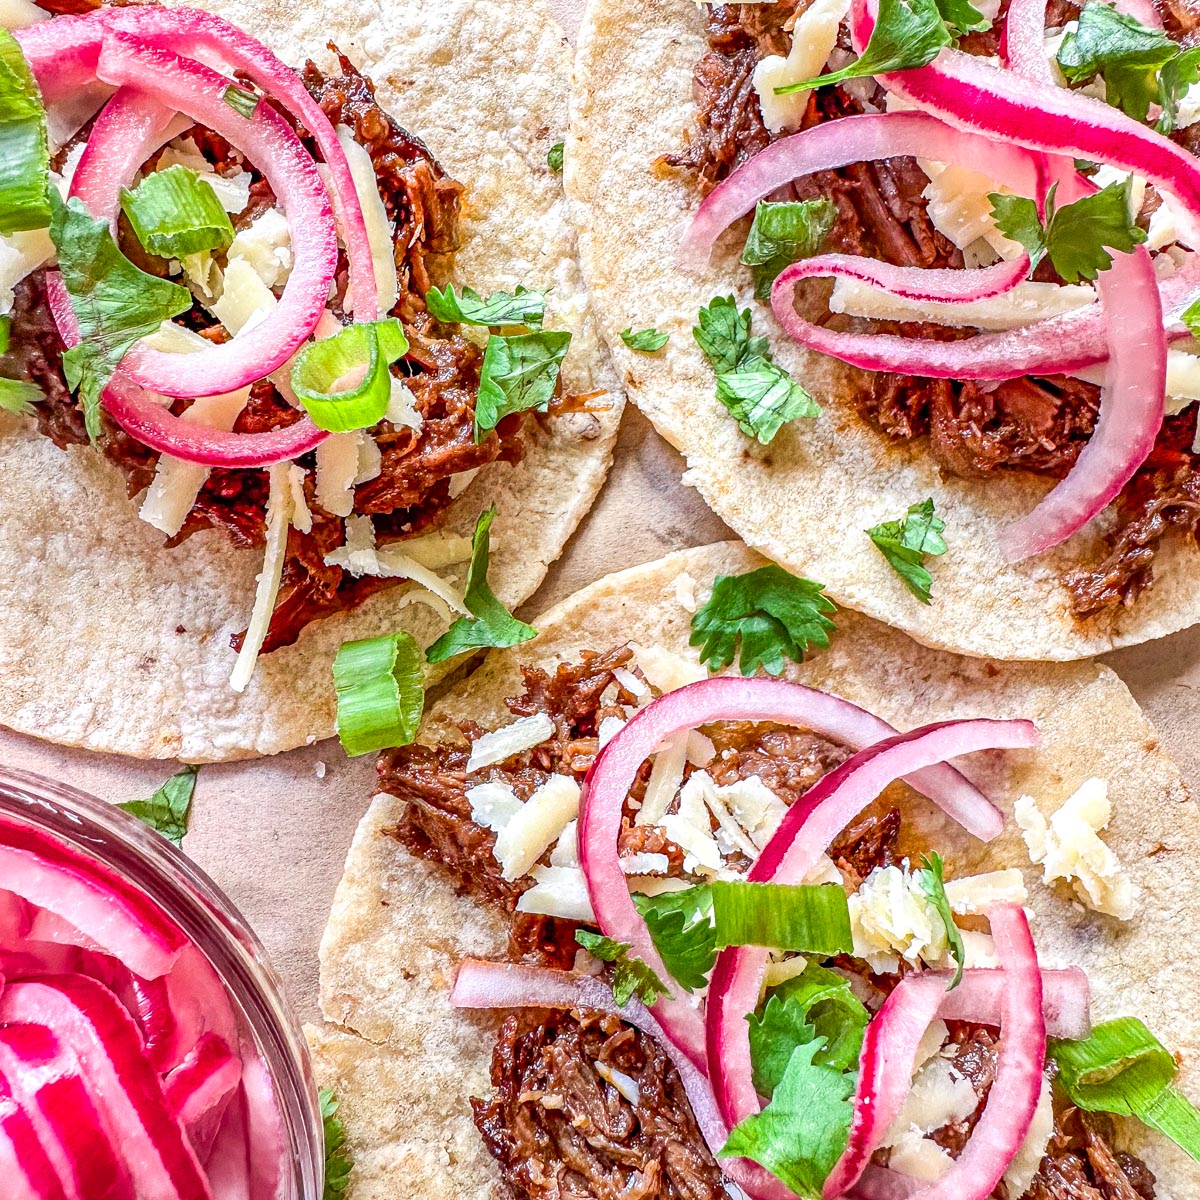 3 Tacos de Barbacoa on corn tortillas, topped with white cheddar cheese, pickled red onions and cilantro.